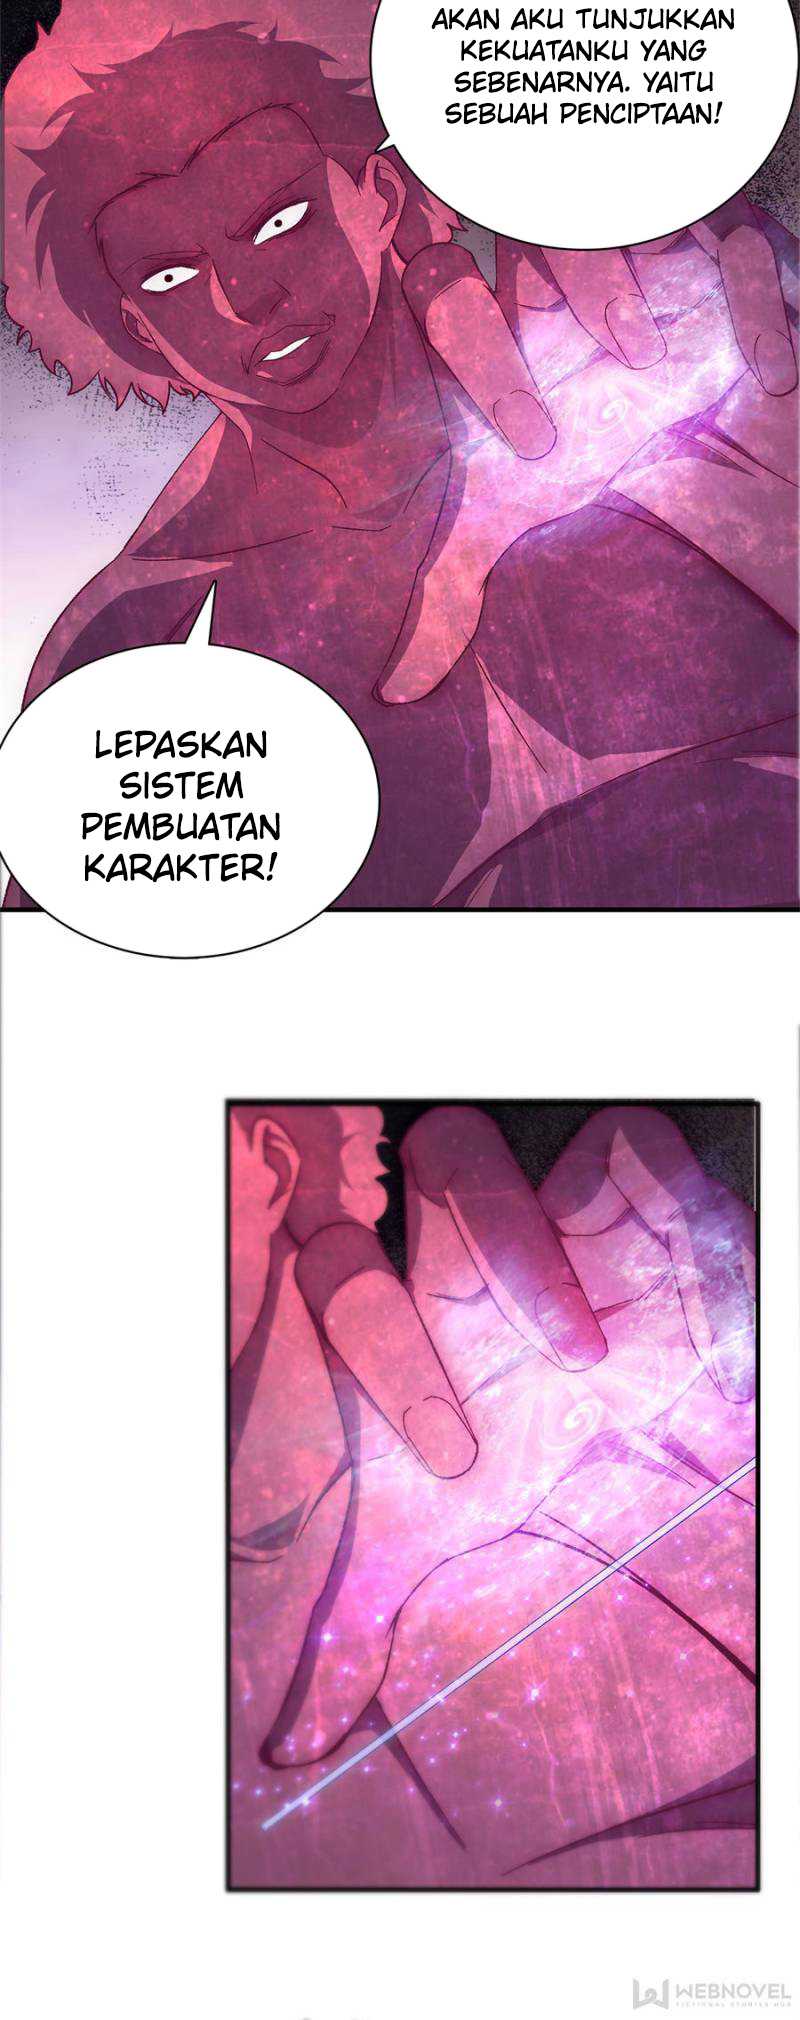 Strongest System Yan Luo Chapter 97